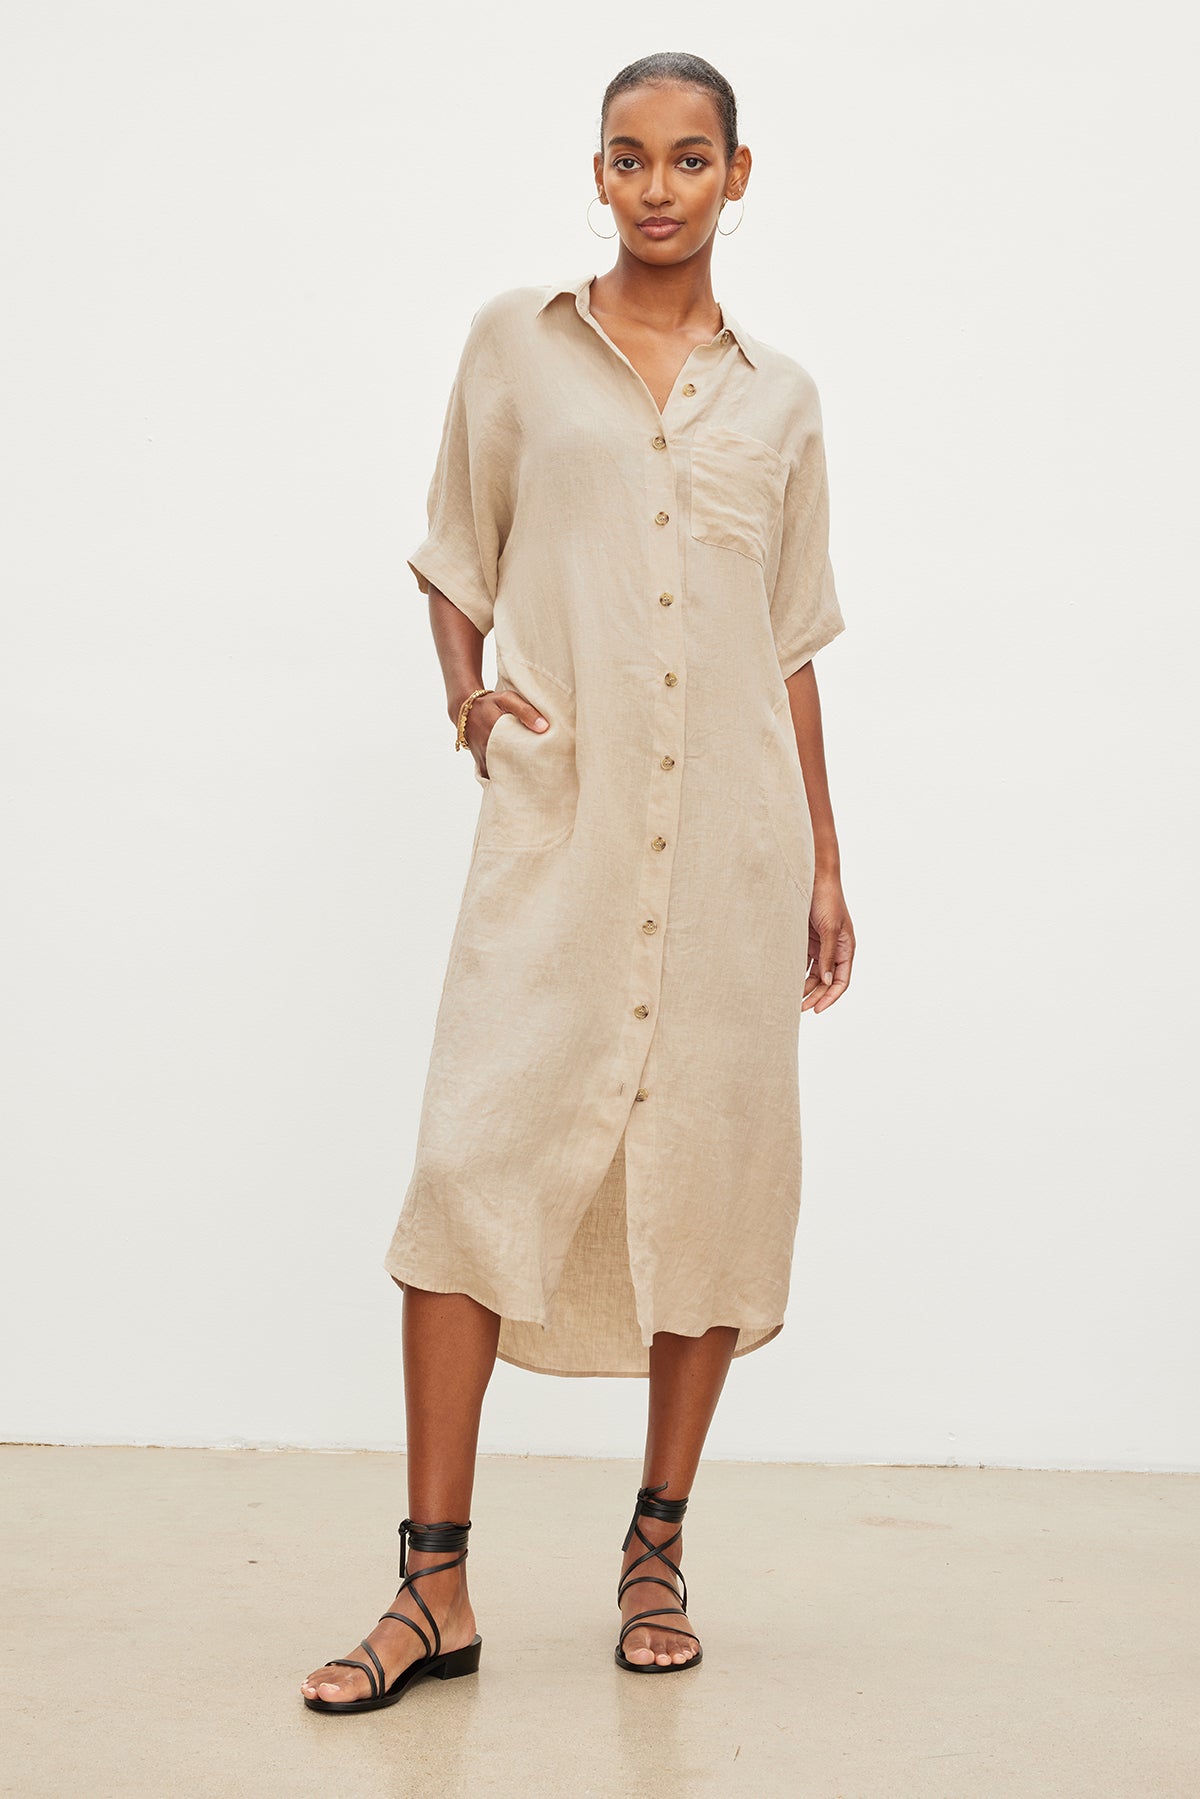   A woman in a SANDRA LINEN BUTTON-UP DRESS by Velvet by Graham & Spencer with short sleeves and buttons standing in a neutral studio setting, paired with black strappy sandals. 